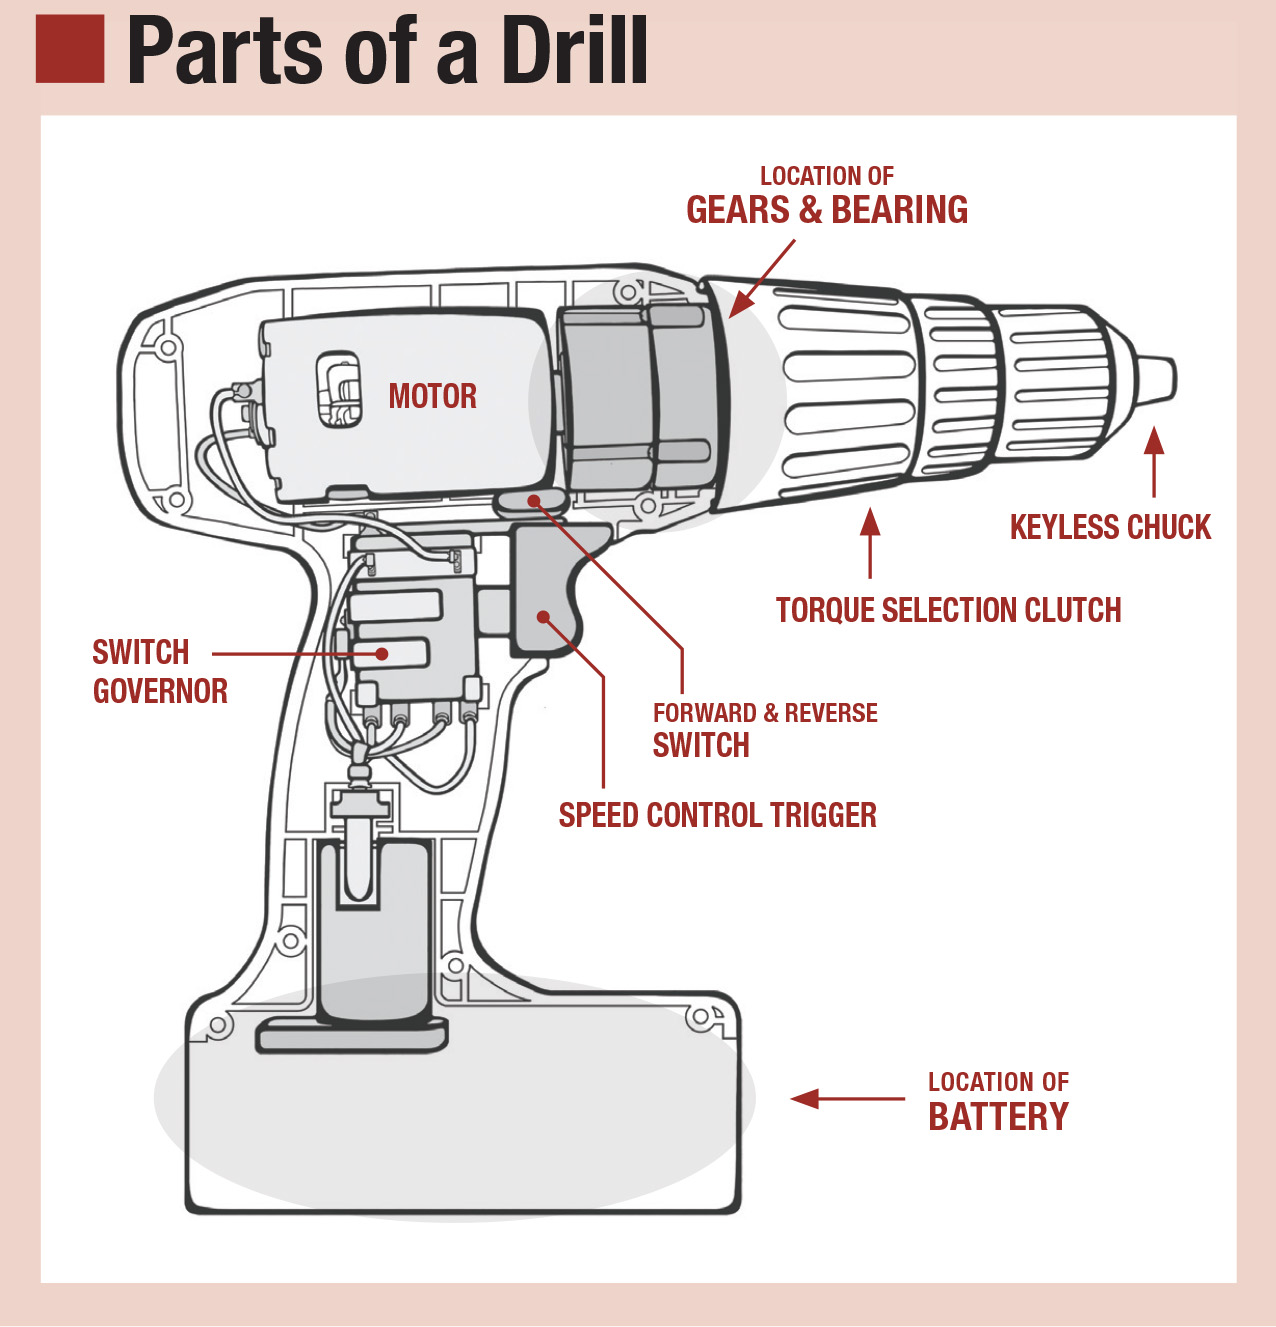 how many volts should a power drill have?